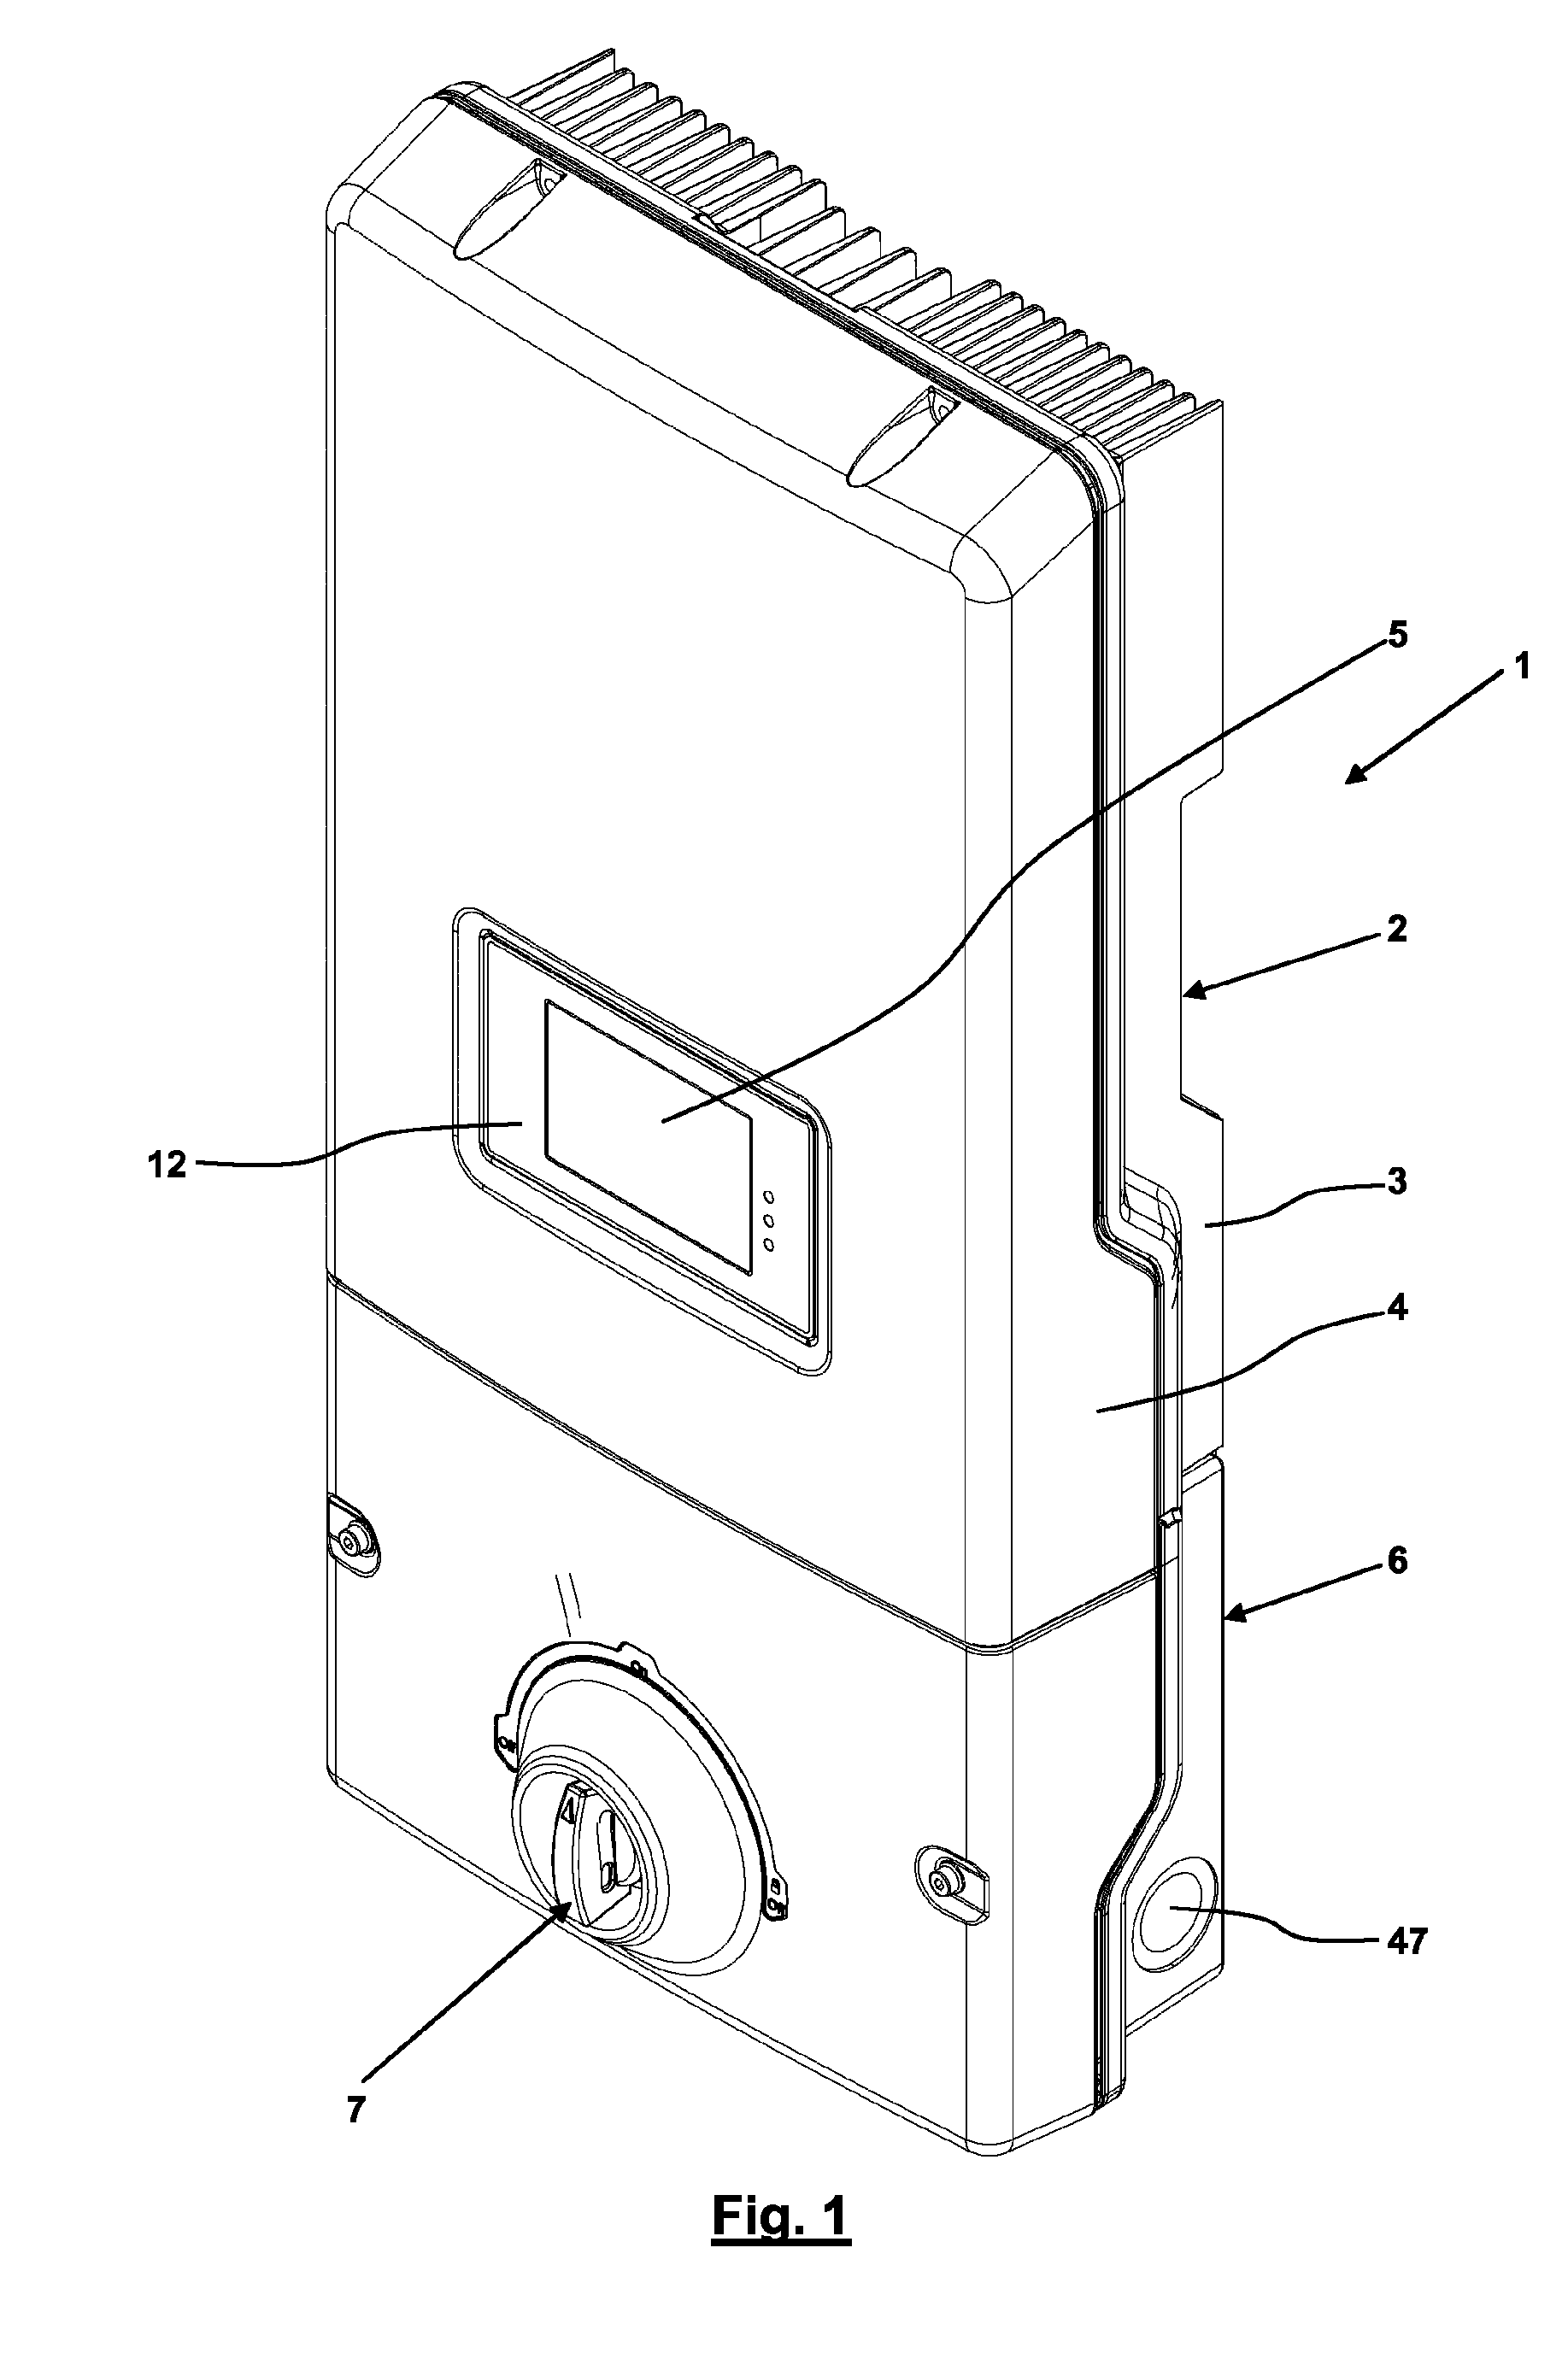 Inverter with electrical and electronic components arranged in a sealed housing